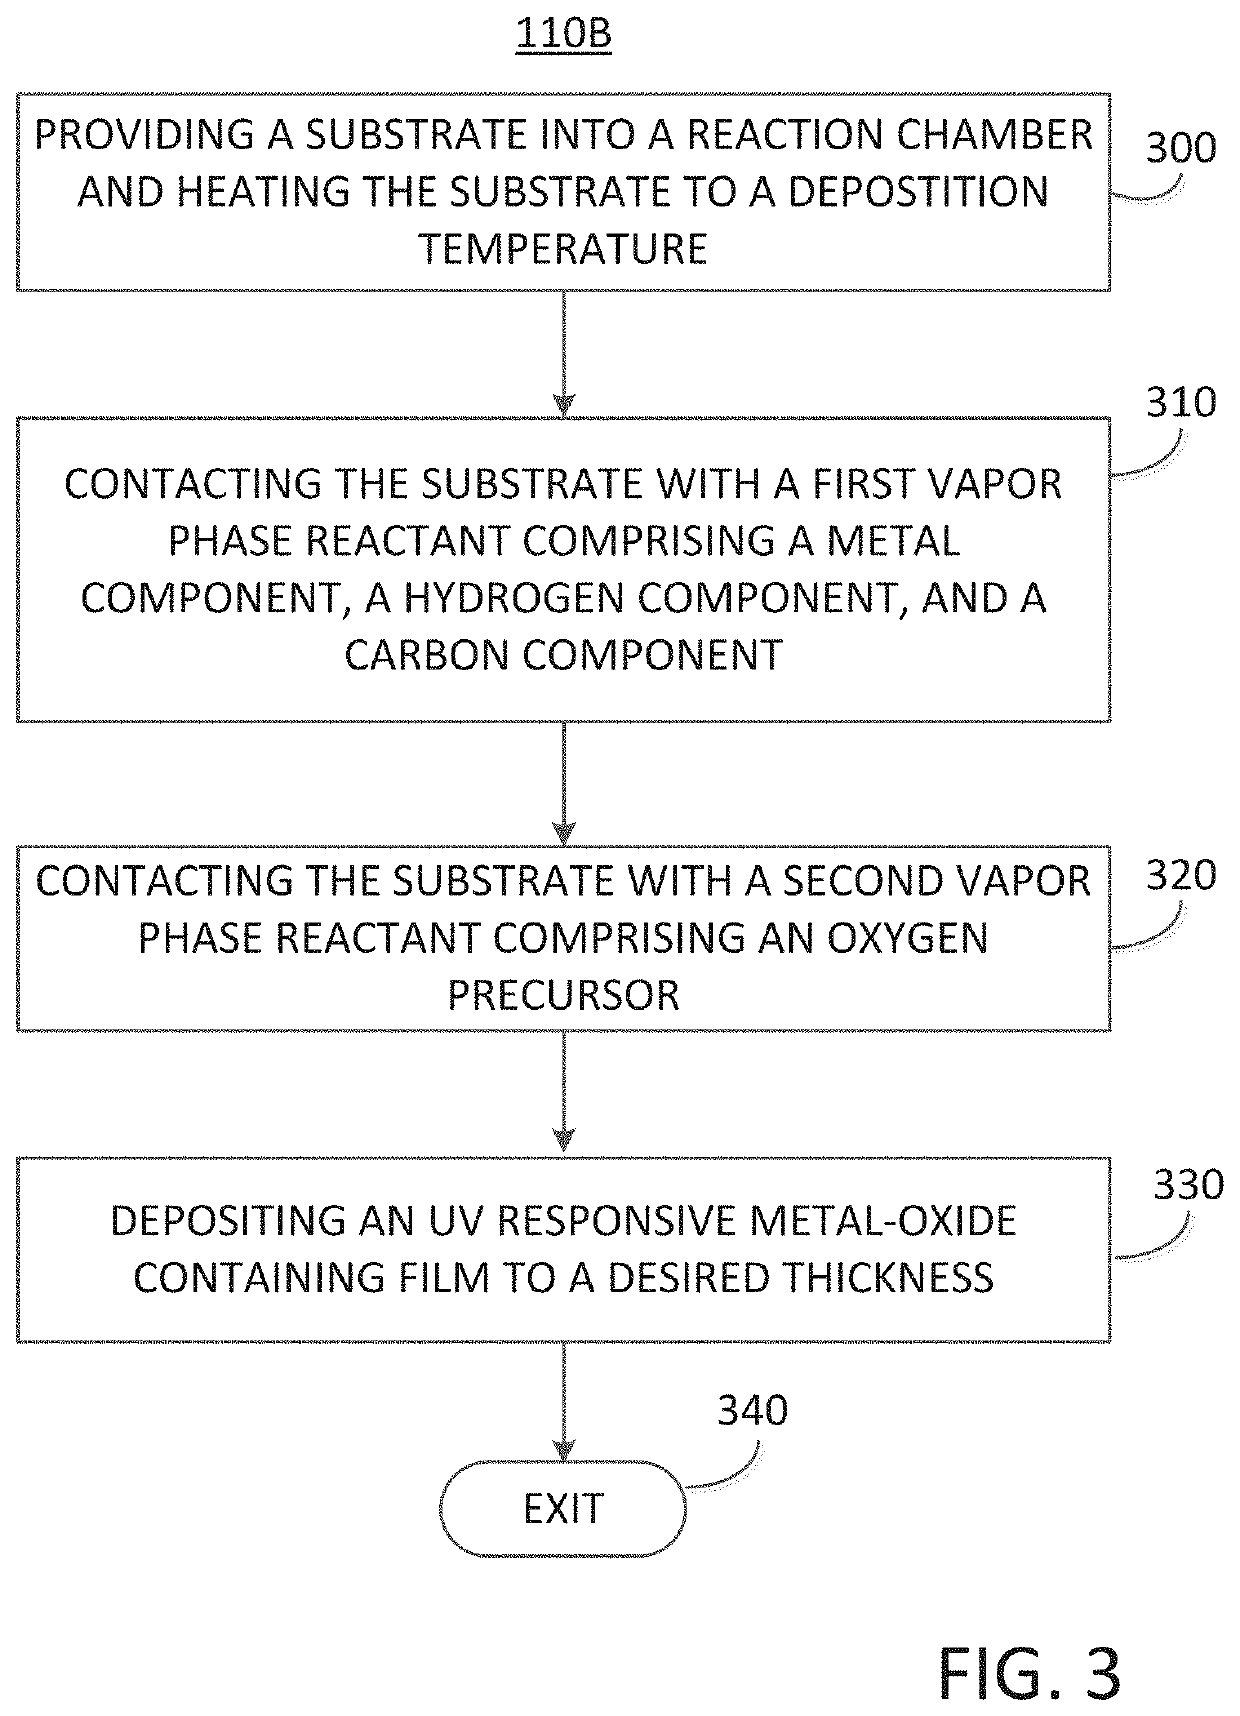 Method for forming an ultraviolet radiation responsive metal oxide-containing film